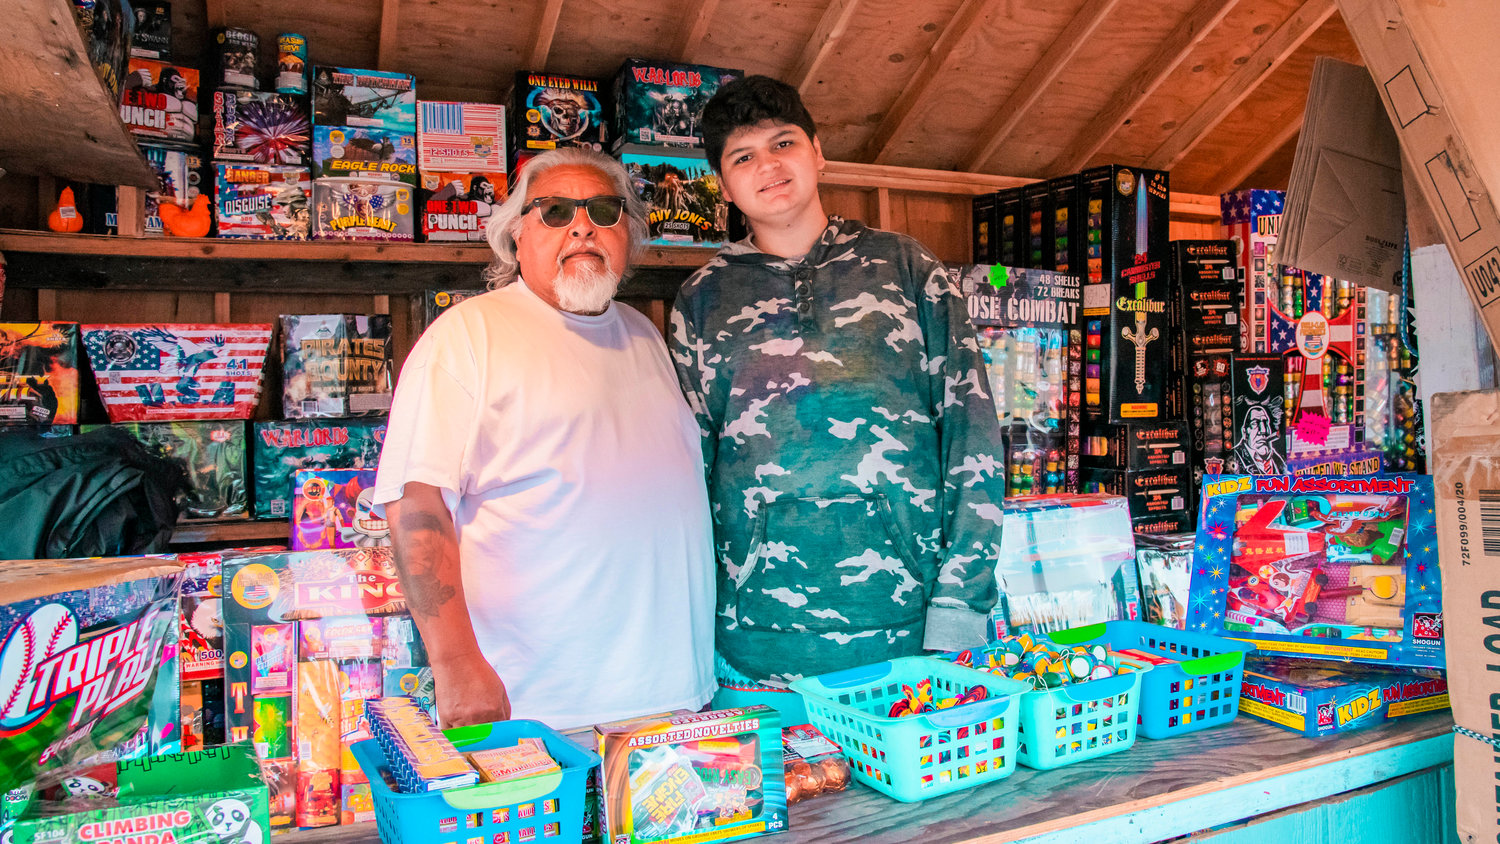 Ray and Artie Romero pose for a photo inside their fireworks booth Thursday. Ray says he hopes one day Artie will take over the business for him.